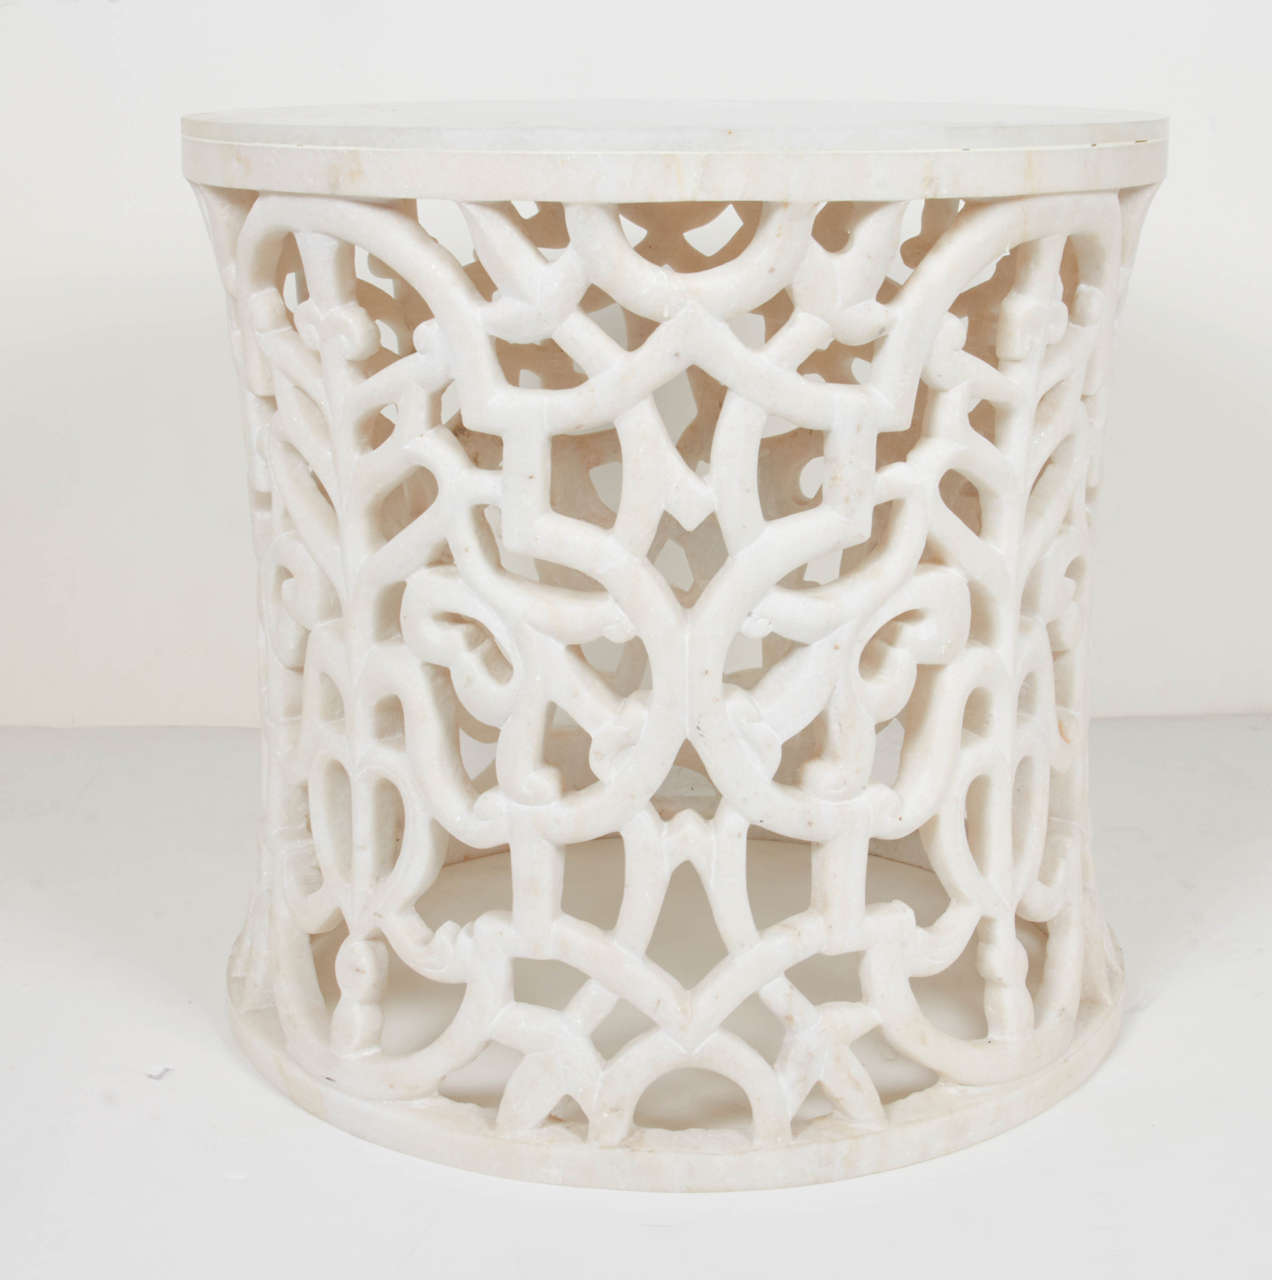 Incredible hand-carved pedestal table or side table in honed white marble. Base has been sculpted from a single piece of marble and features hand-carved Jali designs inspired by Middle Eastern and Indian architecture and window lattices. The table